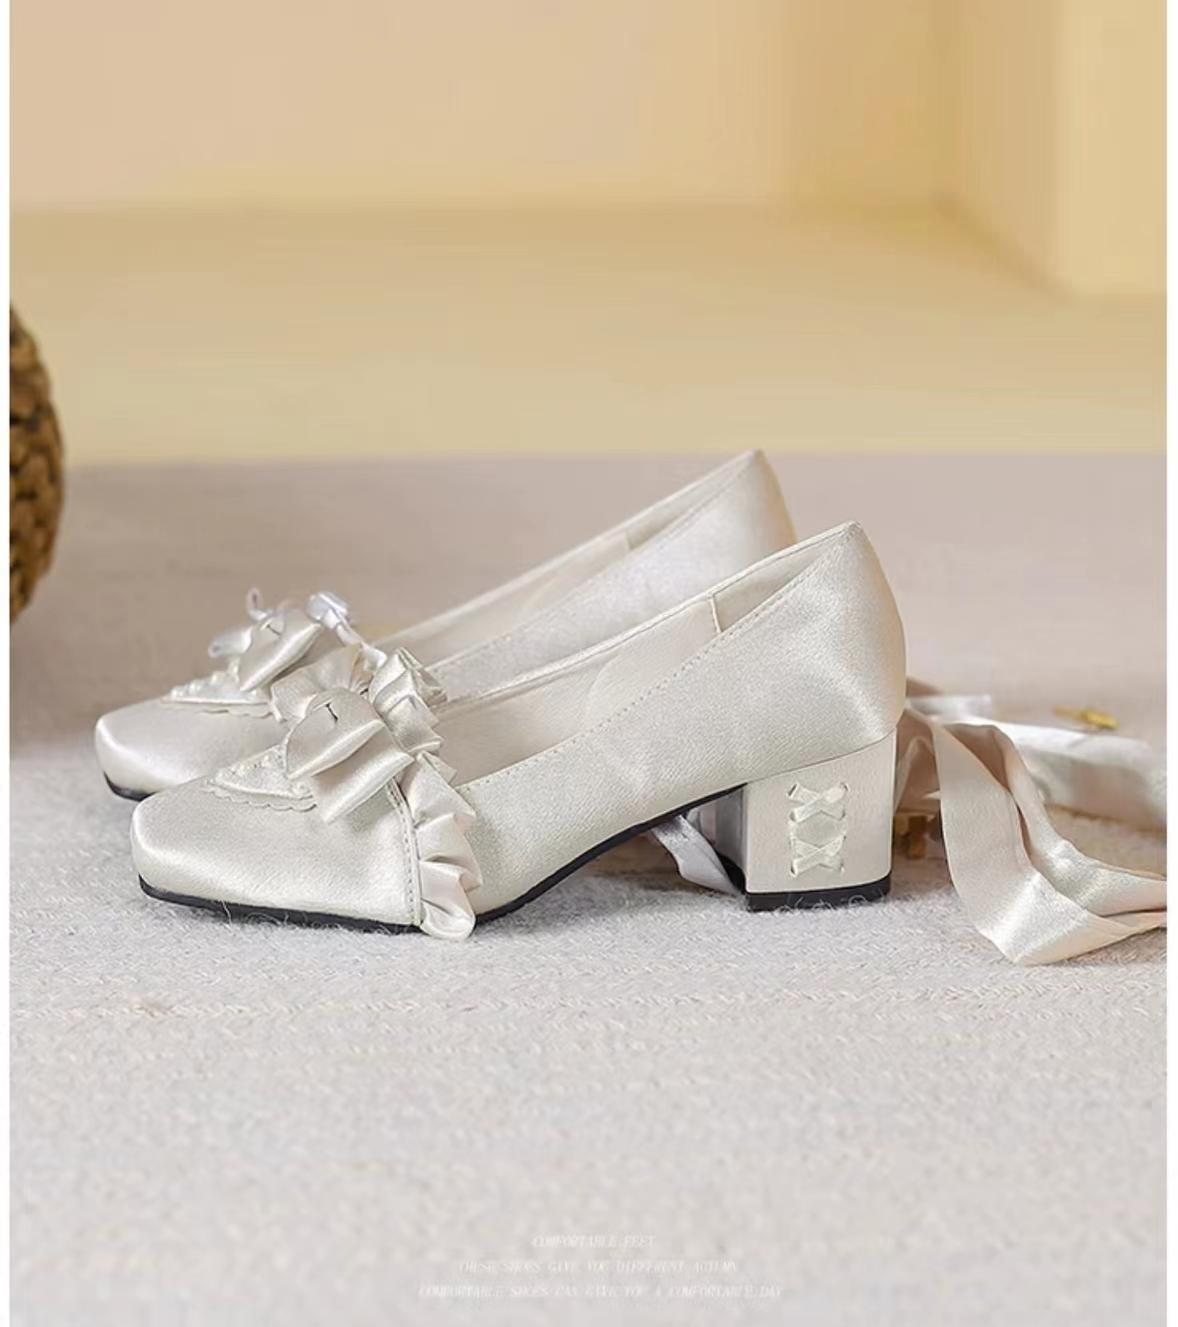 (BFM)WENROO~Ballet Style Lolita Heels Shoes Fairy Shoes Square Head Bow   